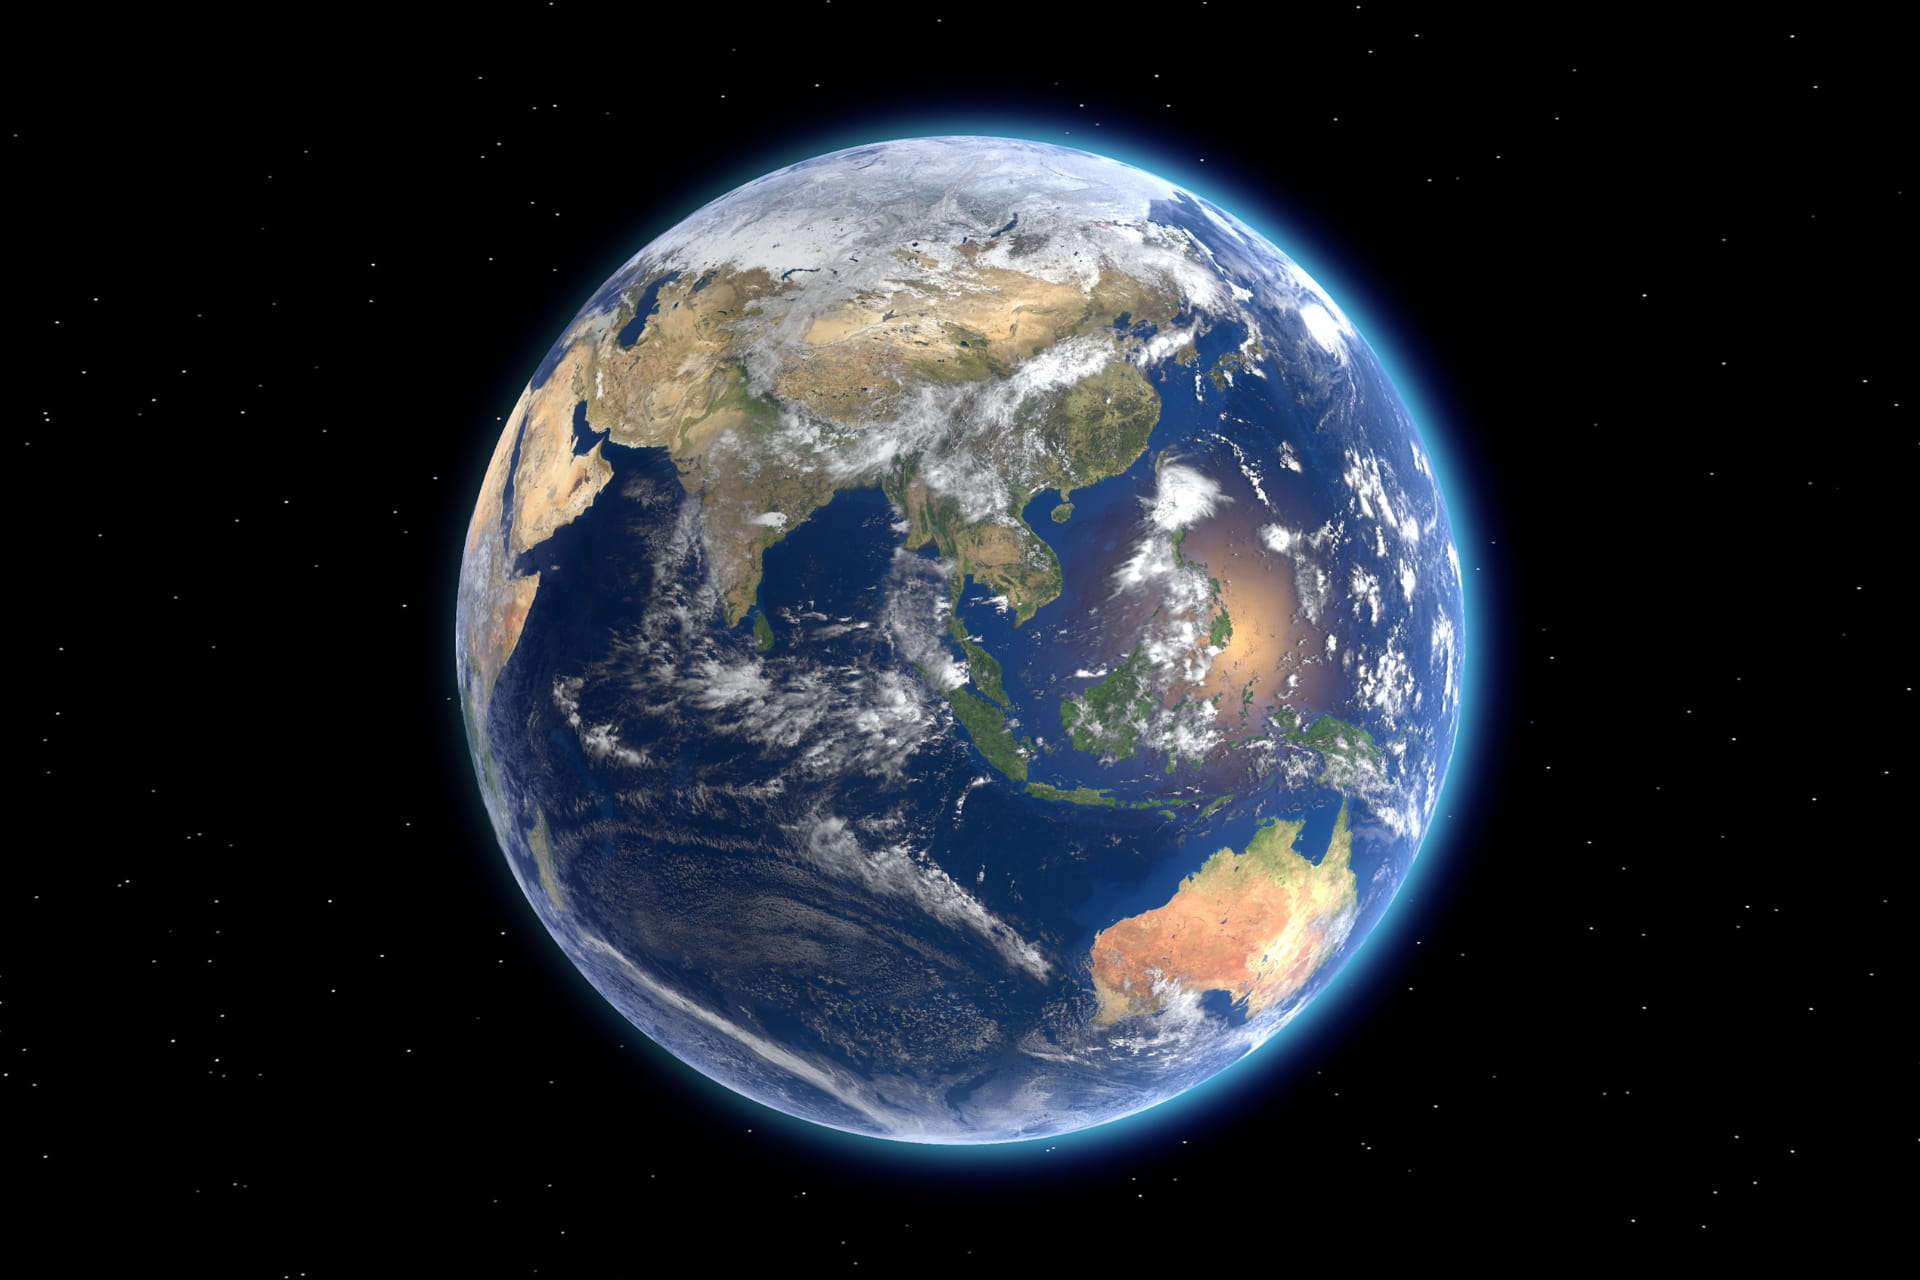 Earth's sphere as seen from space